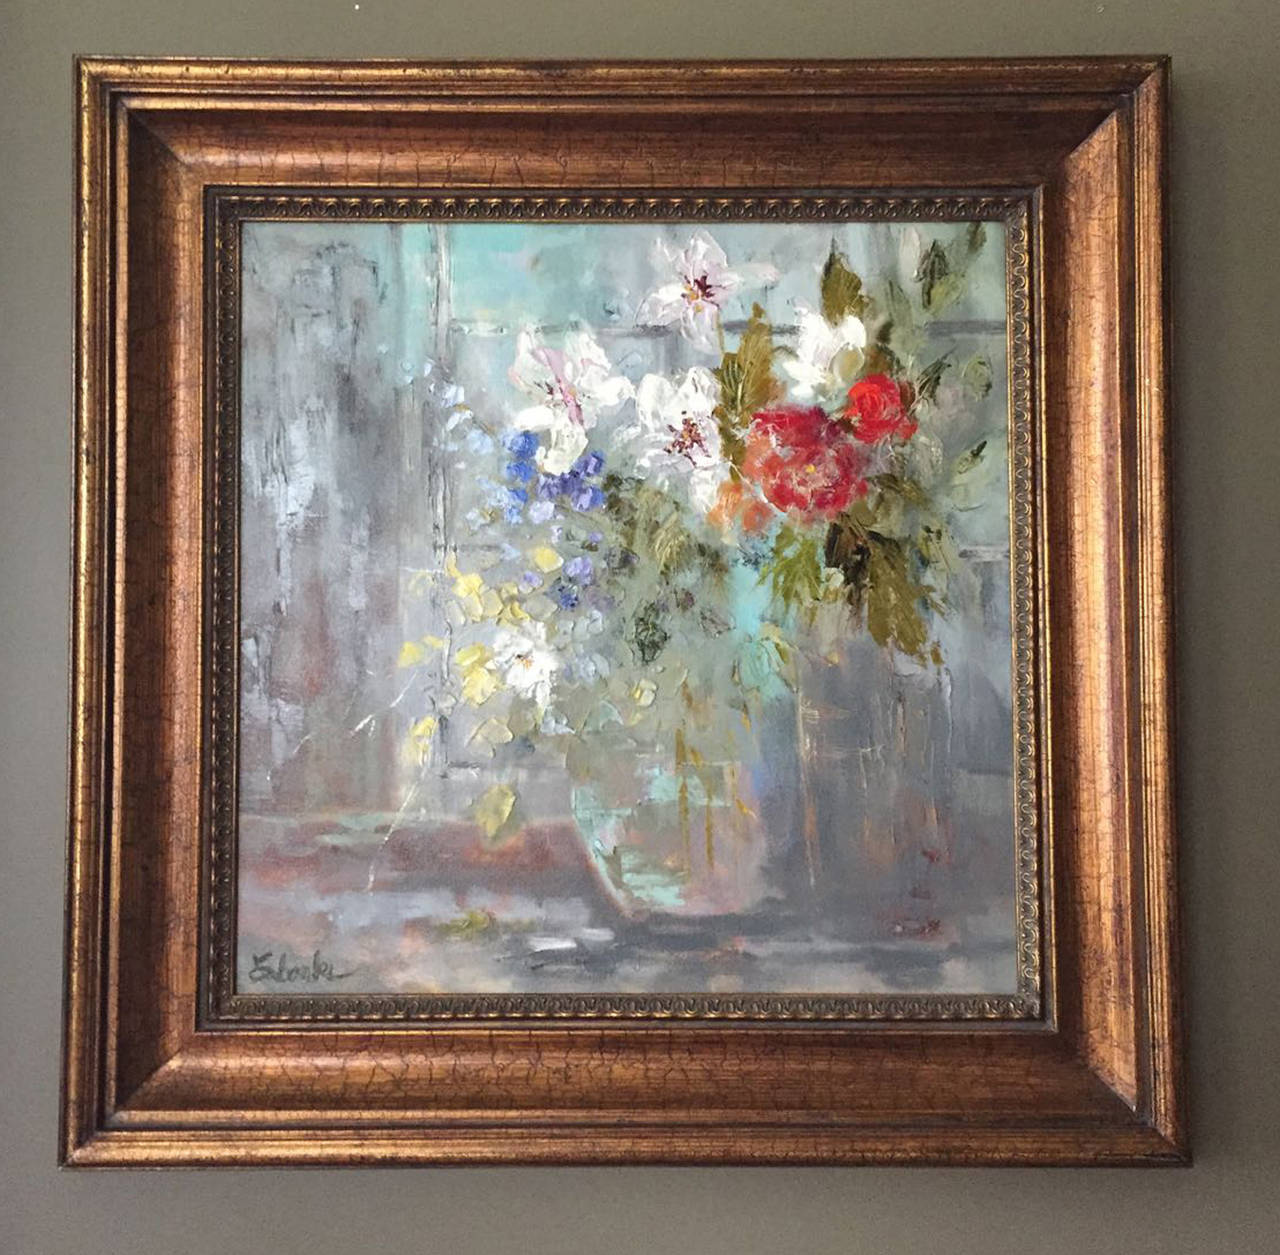 A beautiful flower painting that is a mix of both realism and abstract with  white, red and blue blooms.

About Lori Eubanks
Lori Eubanks is inspired by the French impressionists, but dedicated to her own unique approach to form. She combines